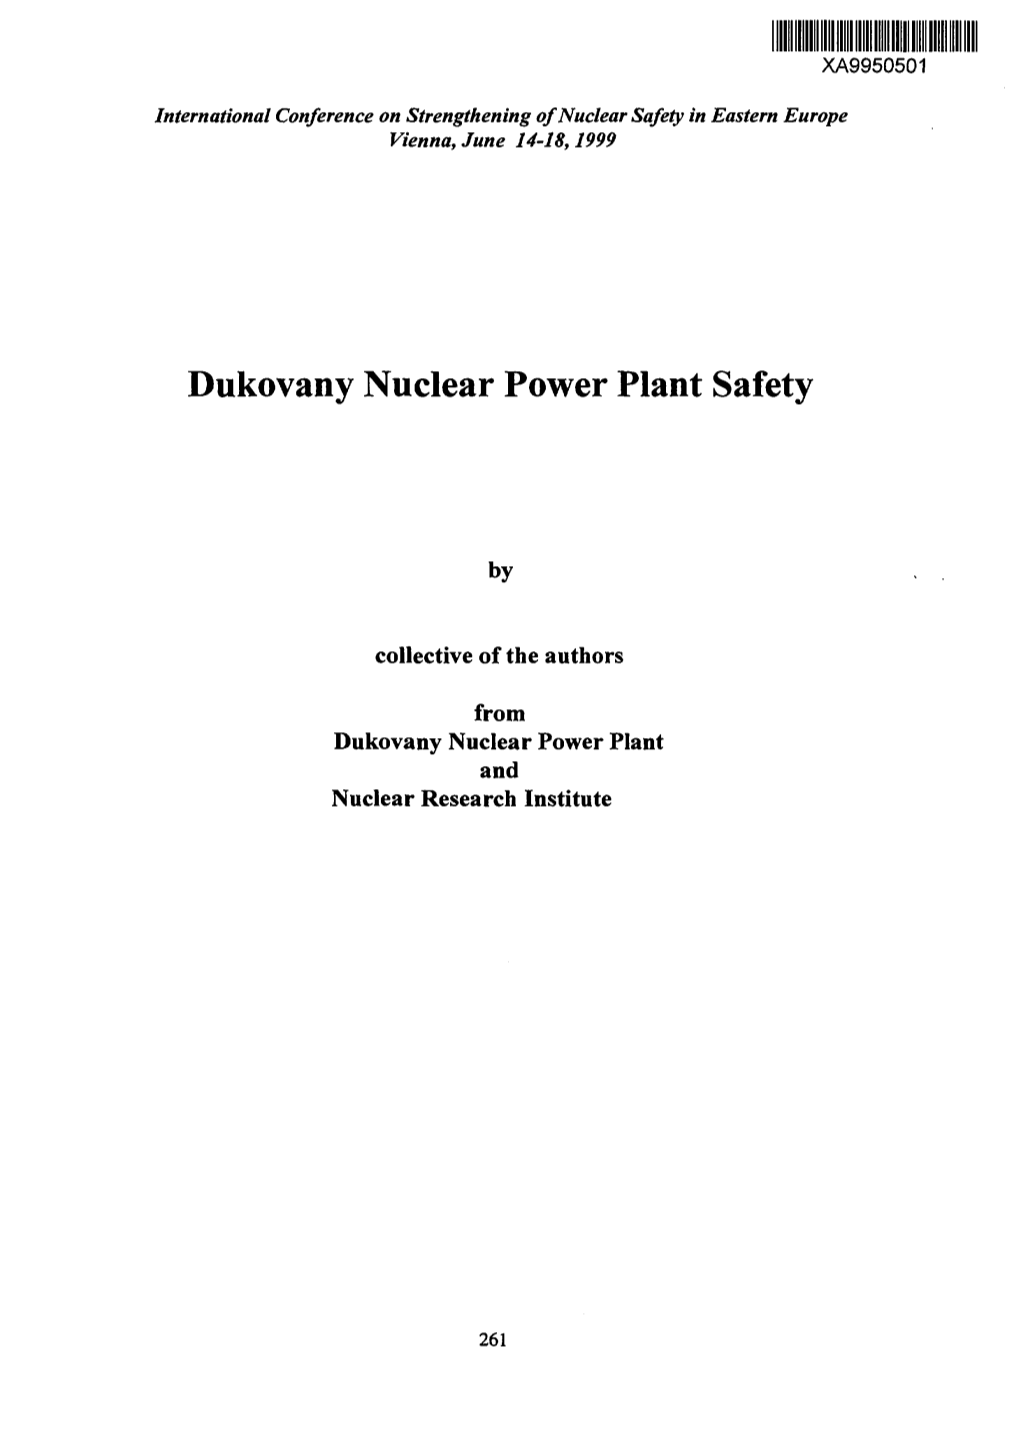 Dukovany Nuclear Power Plant Safety